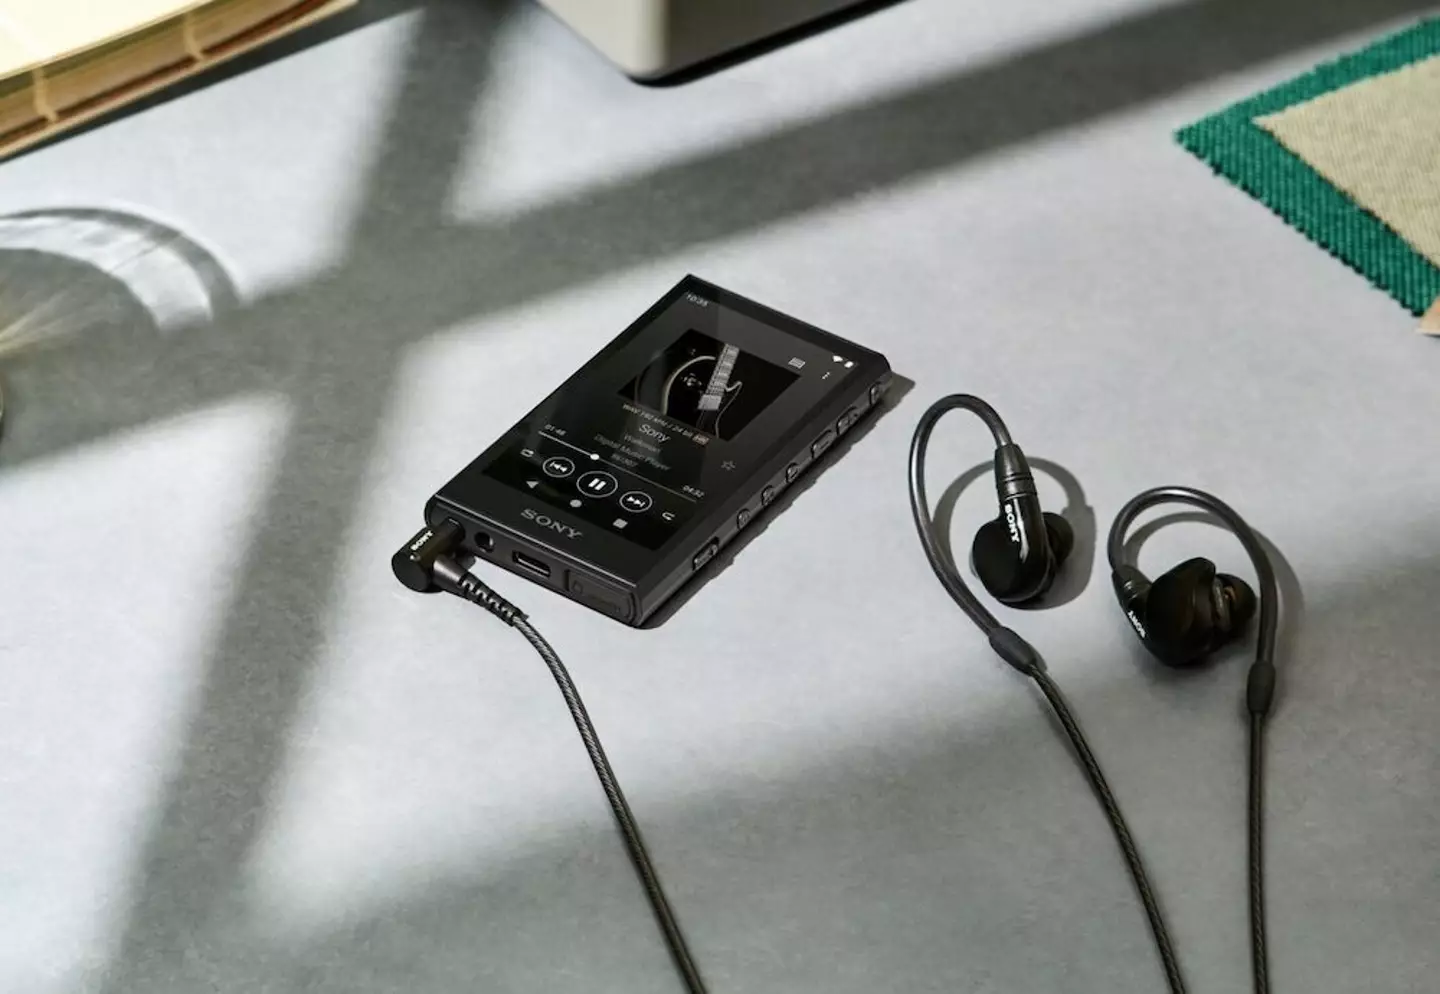 Introducing Sony's latest Walkman: the NW-A306.